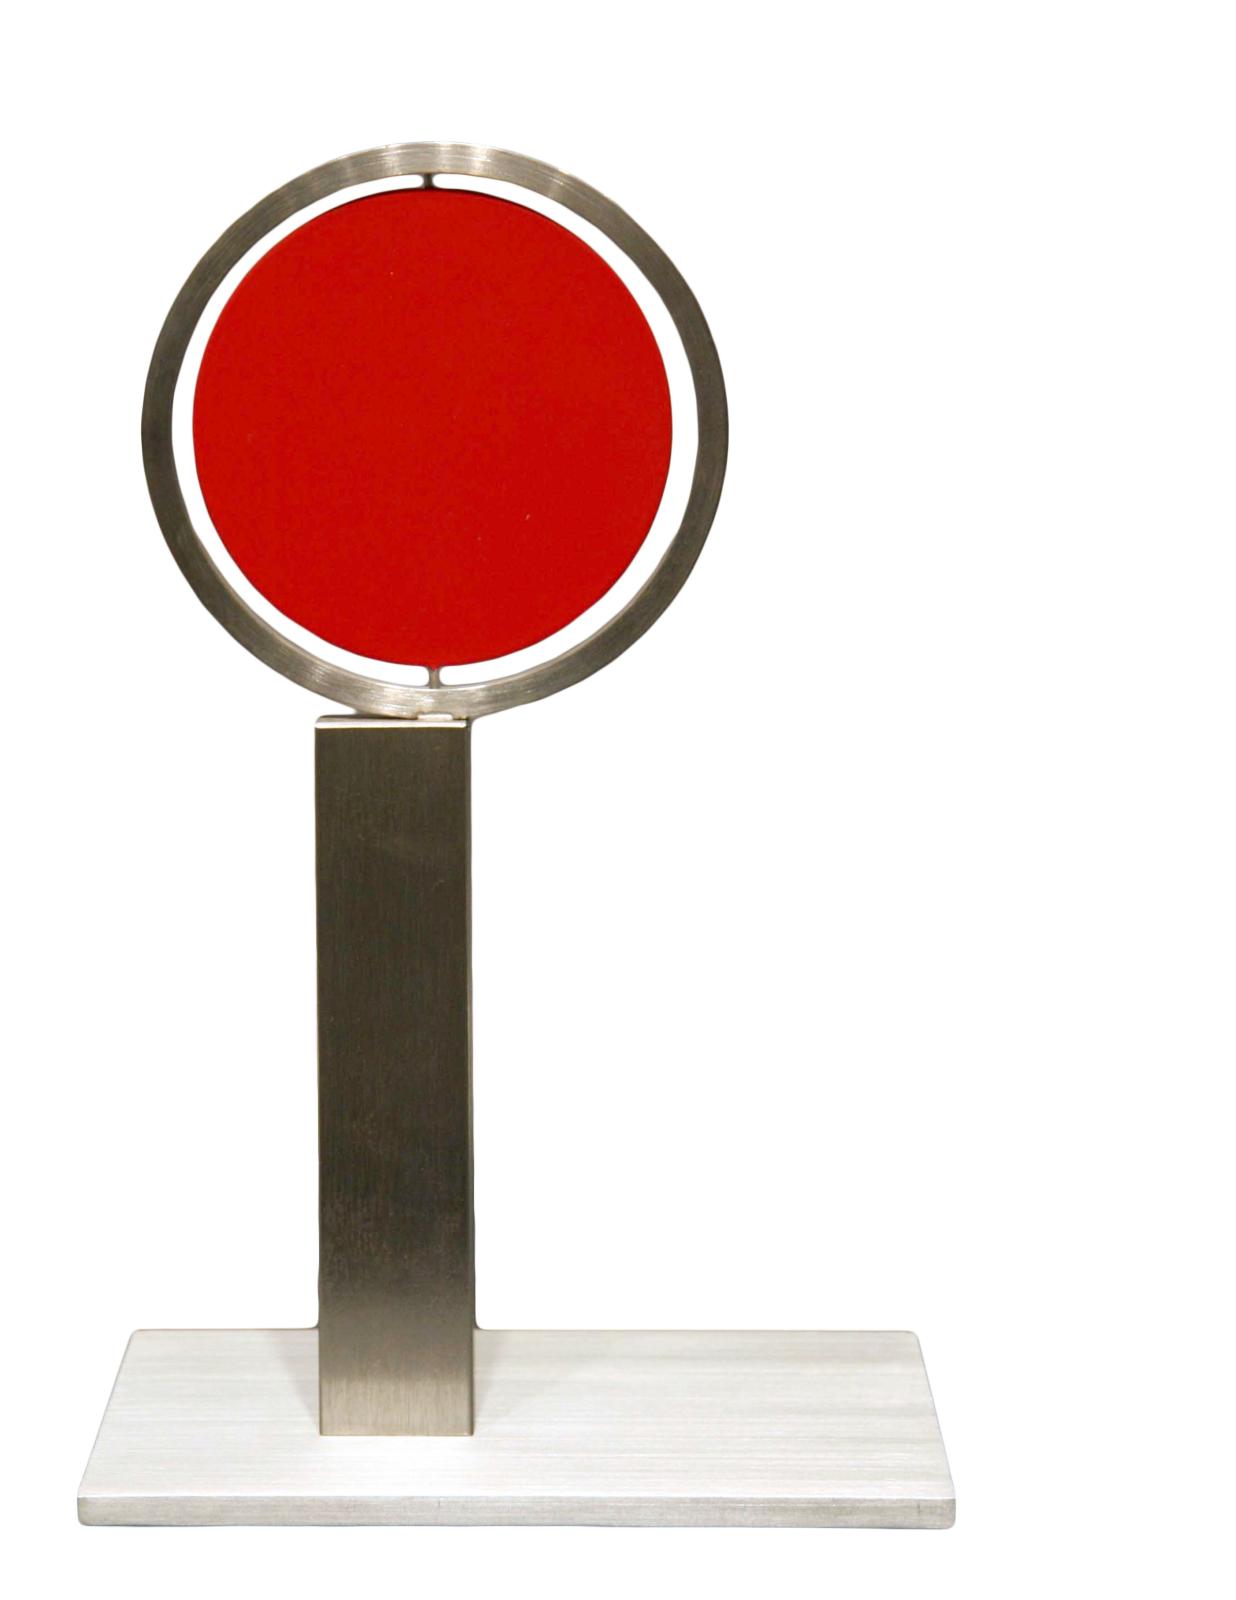 Roger Phillips, Disc on Column (maquette), 2004